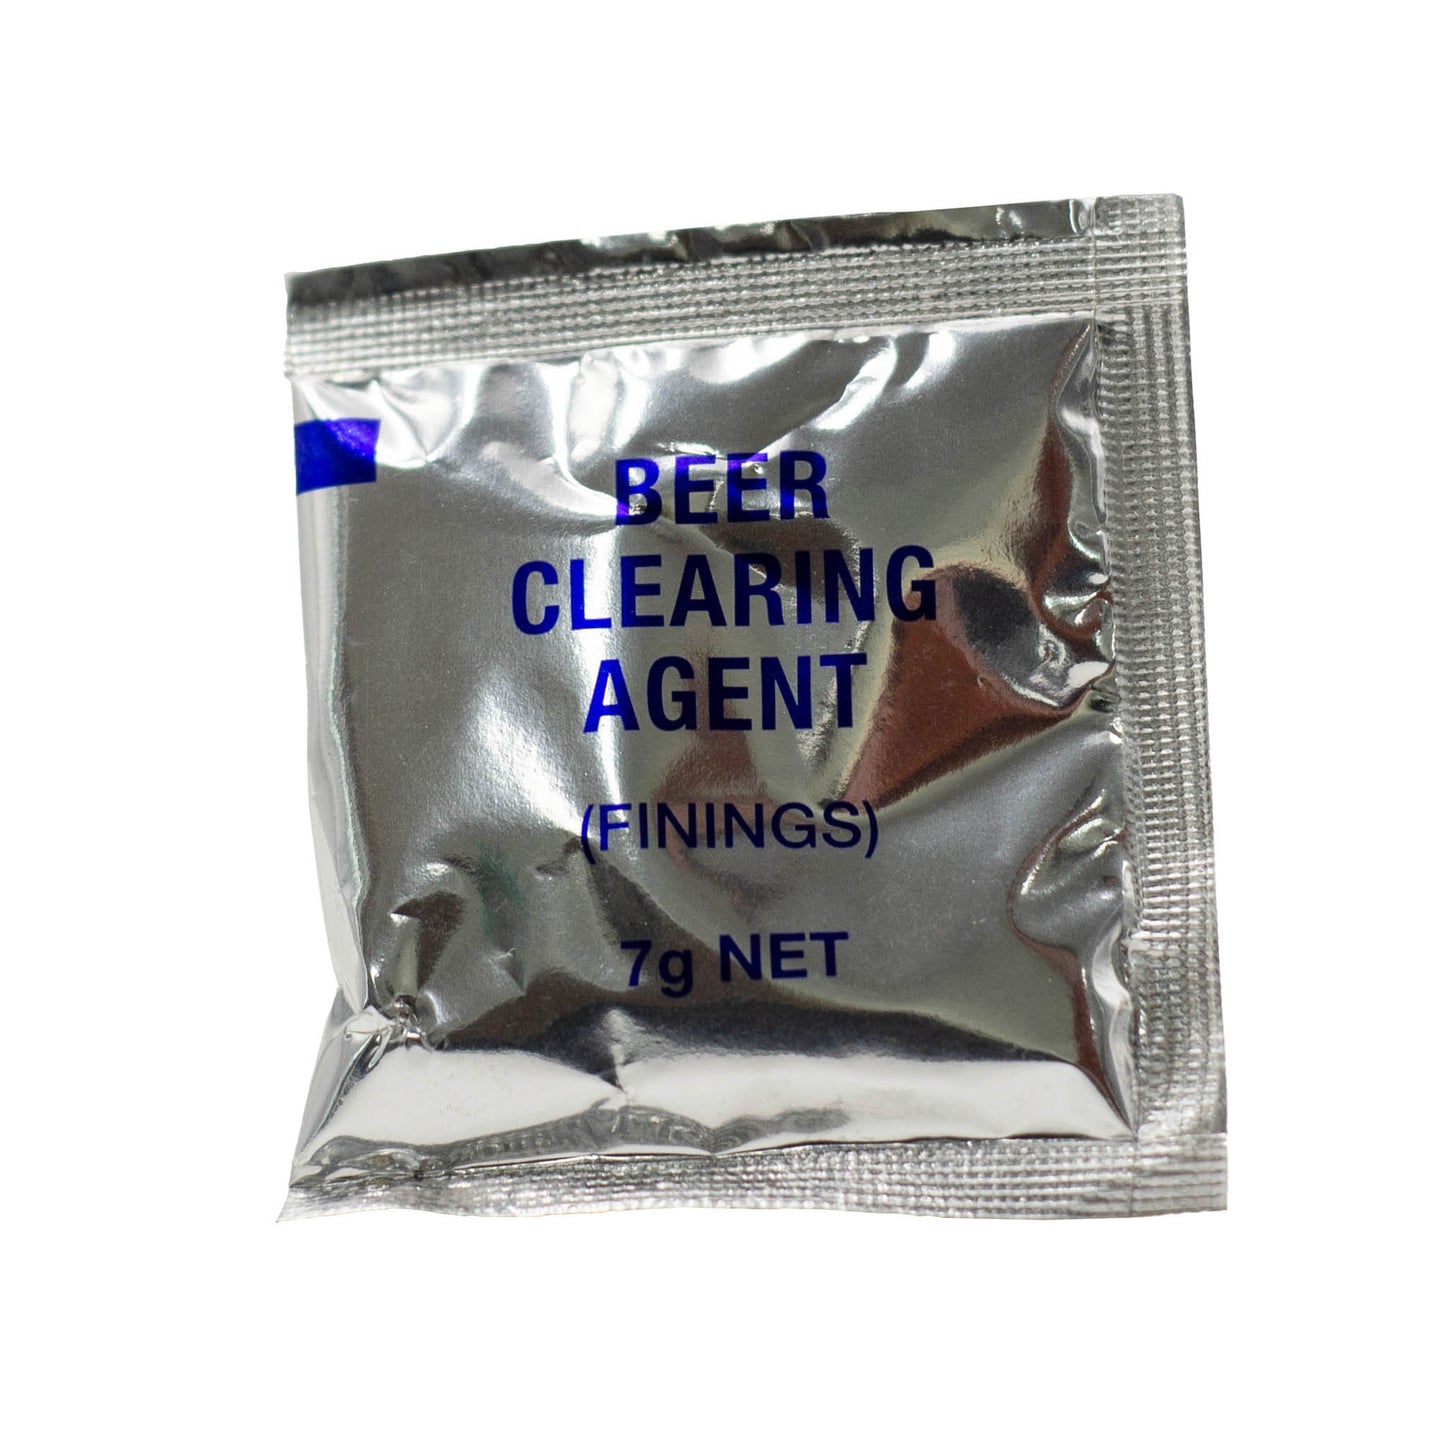 7g packet of gelatin beer finings used for clarifying beer. 